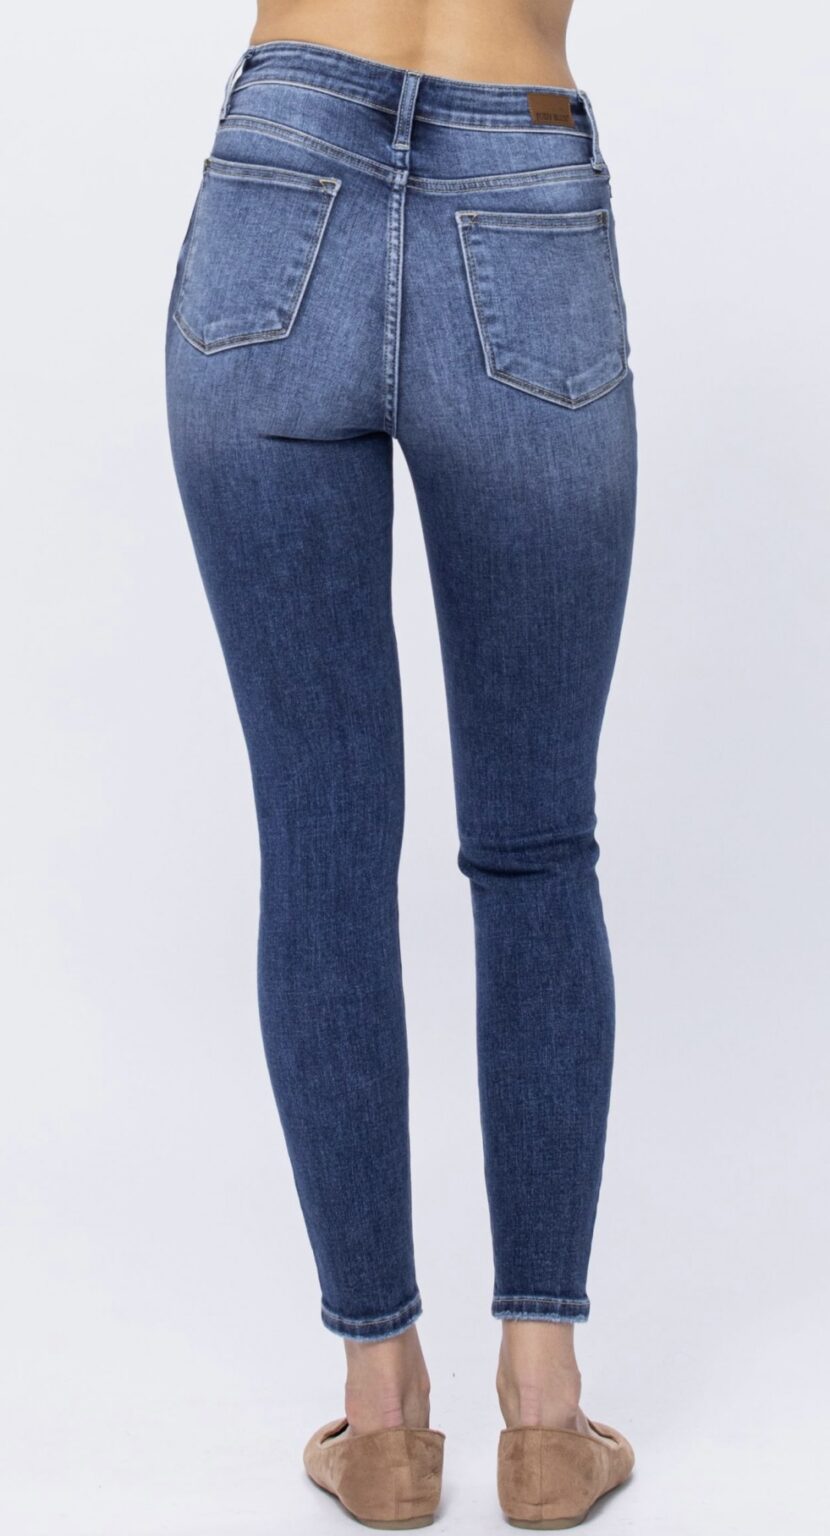 All Rise Button Fly Judy Blue Jeans